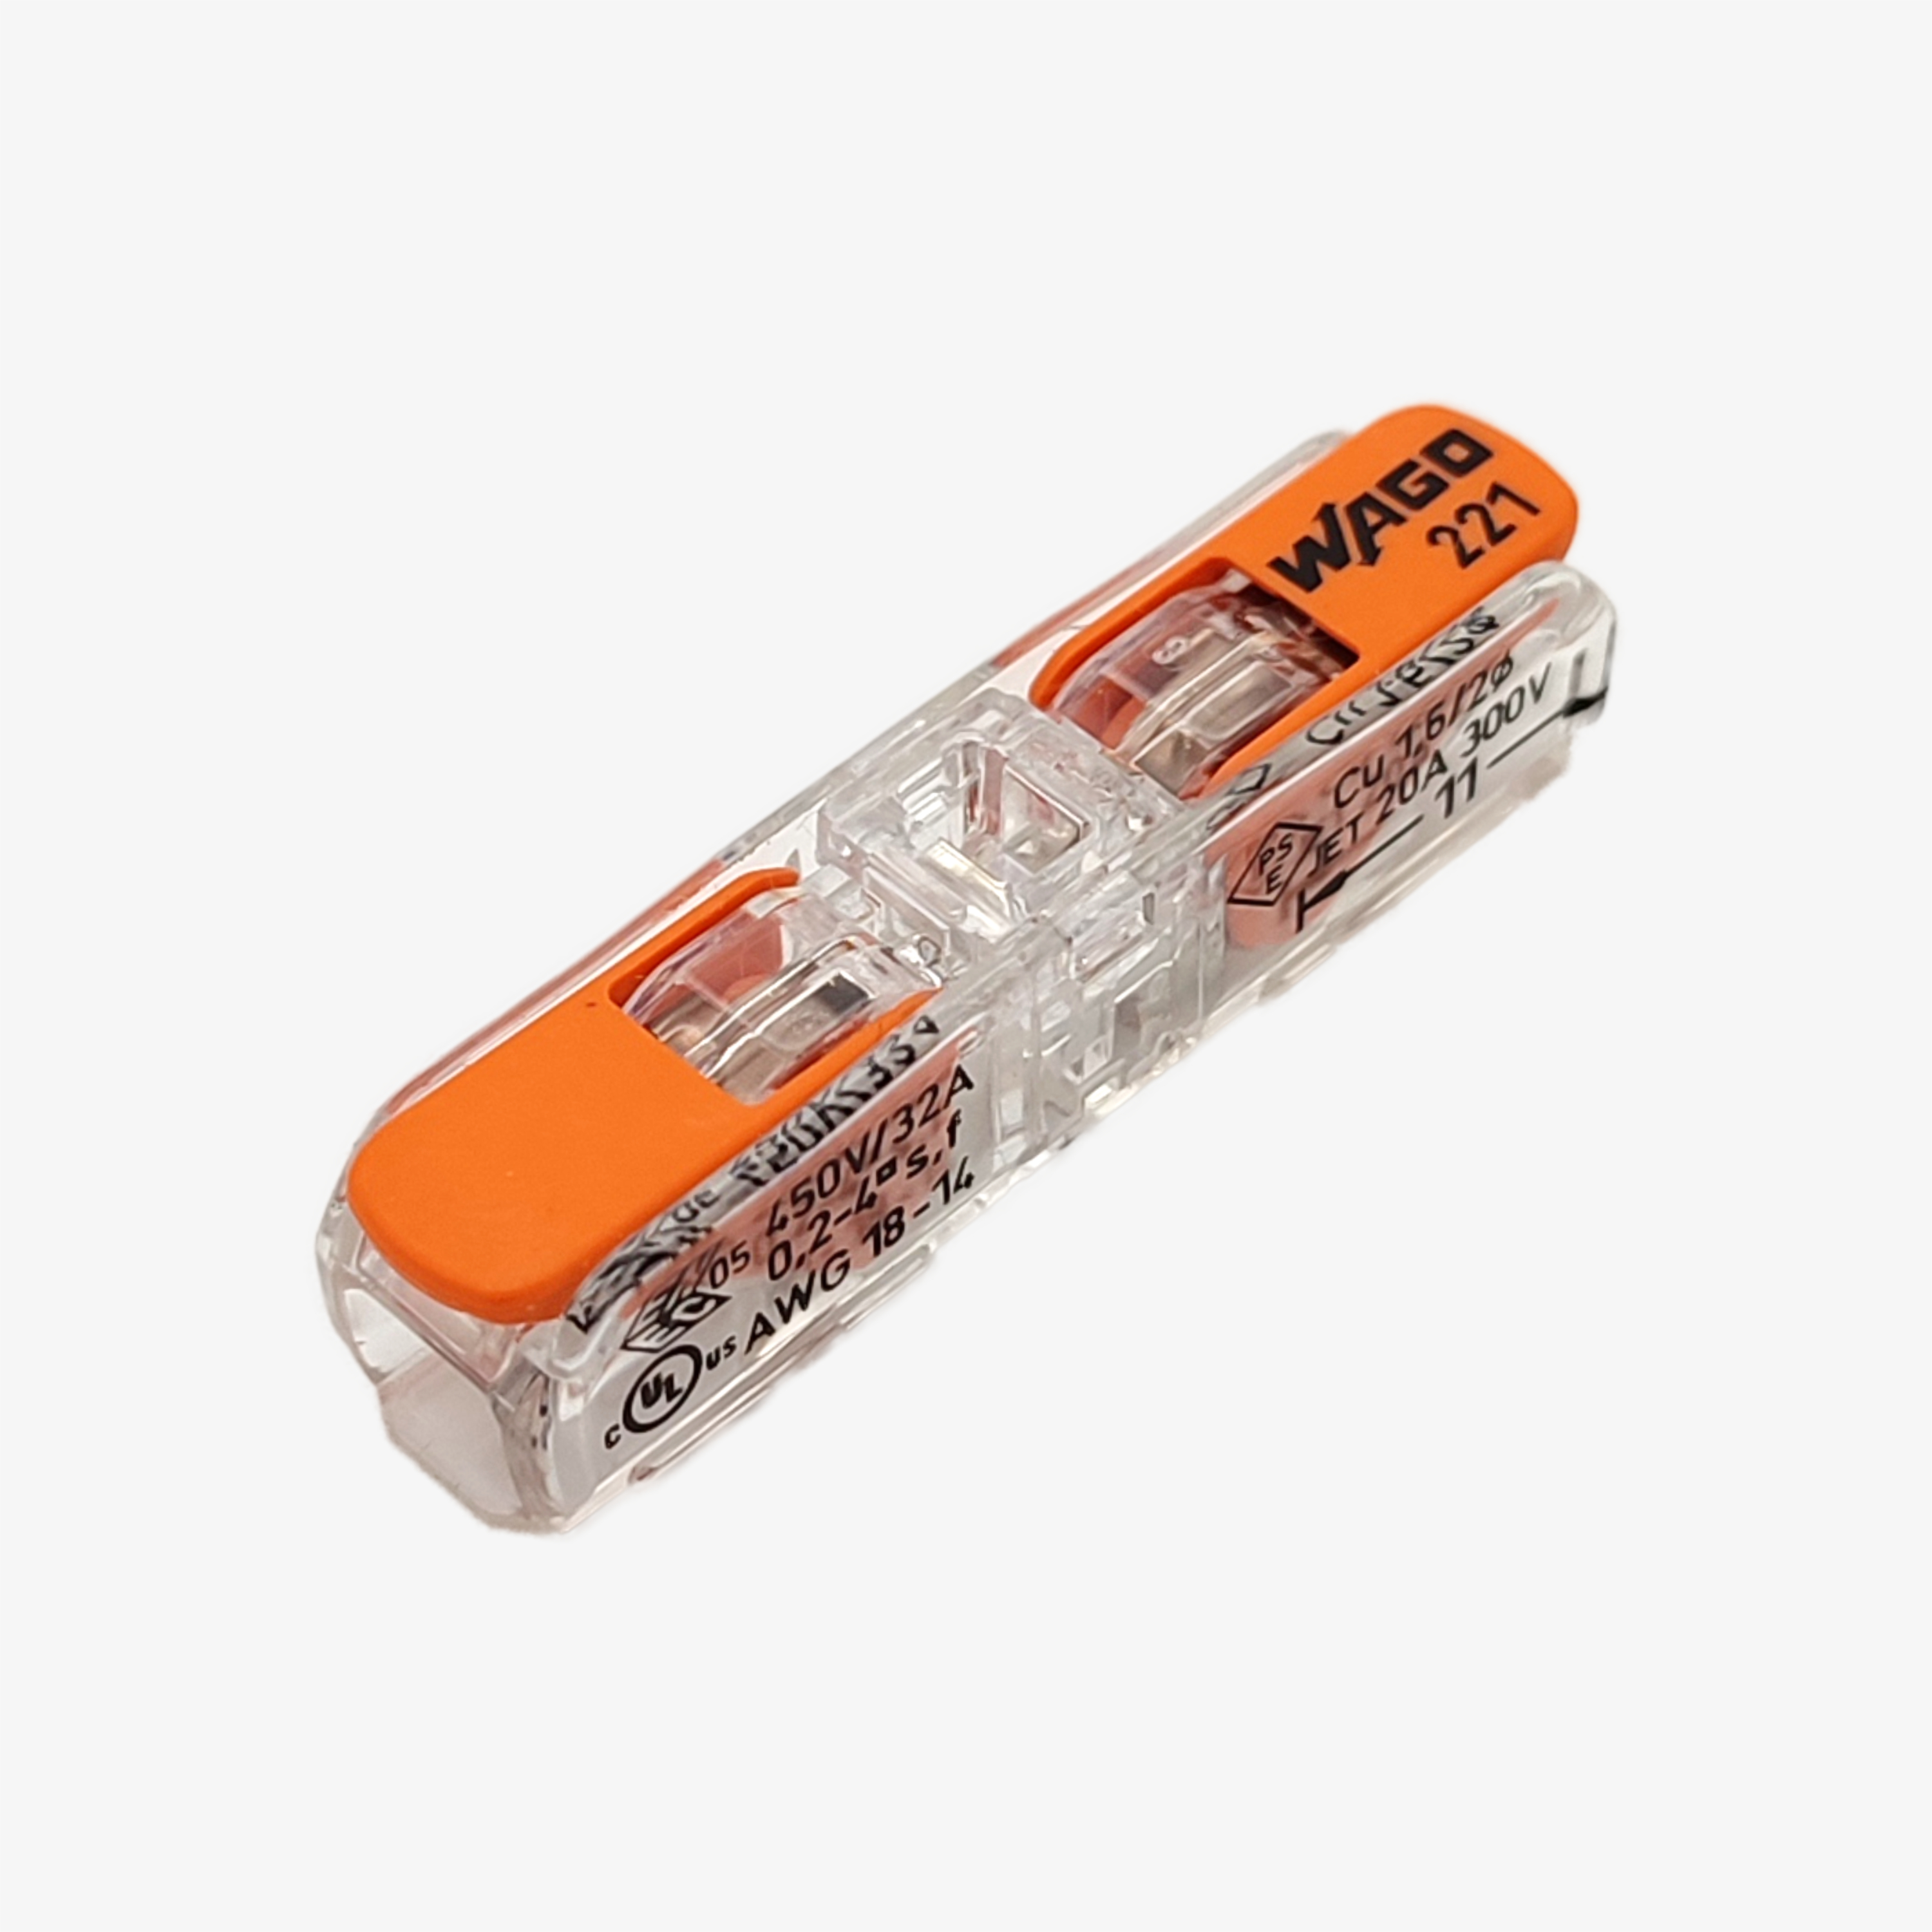 New Wago 221 Inline Connector That EVERYONE is Talking About - And